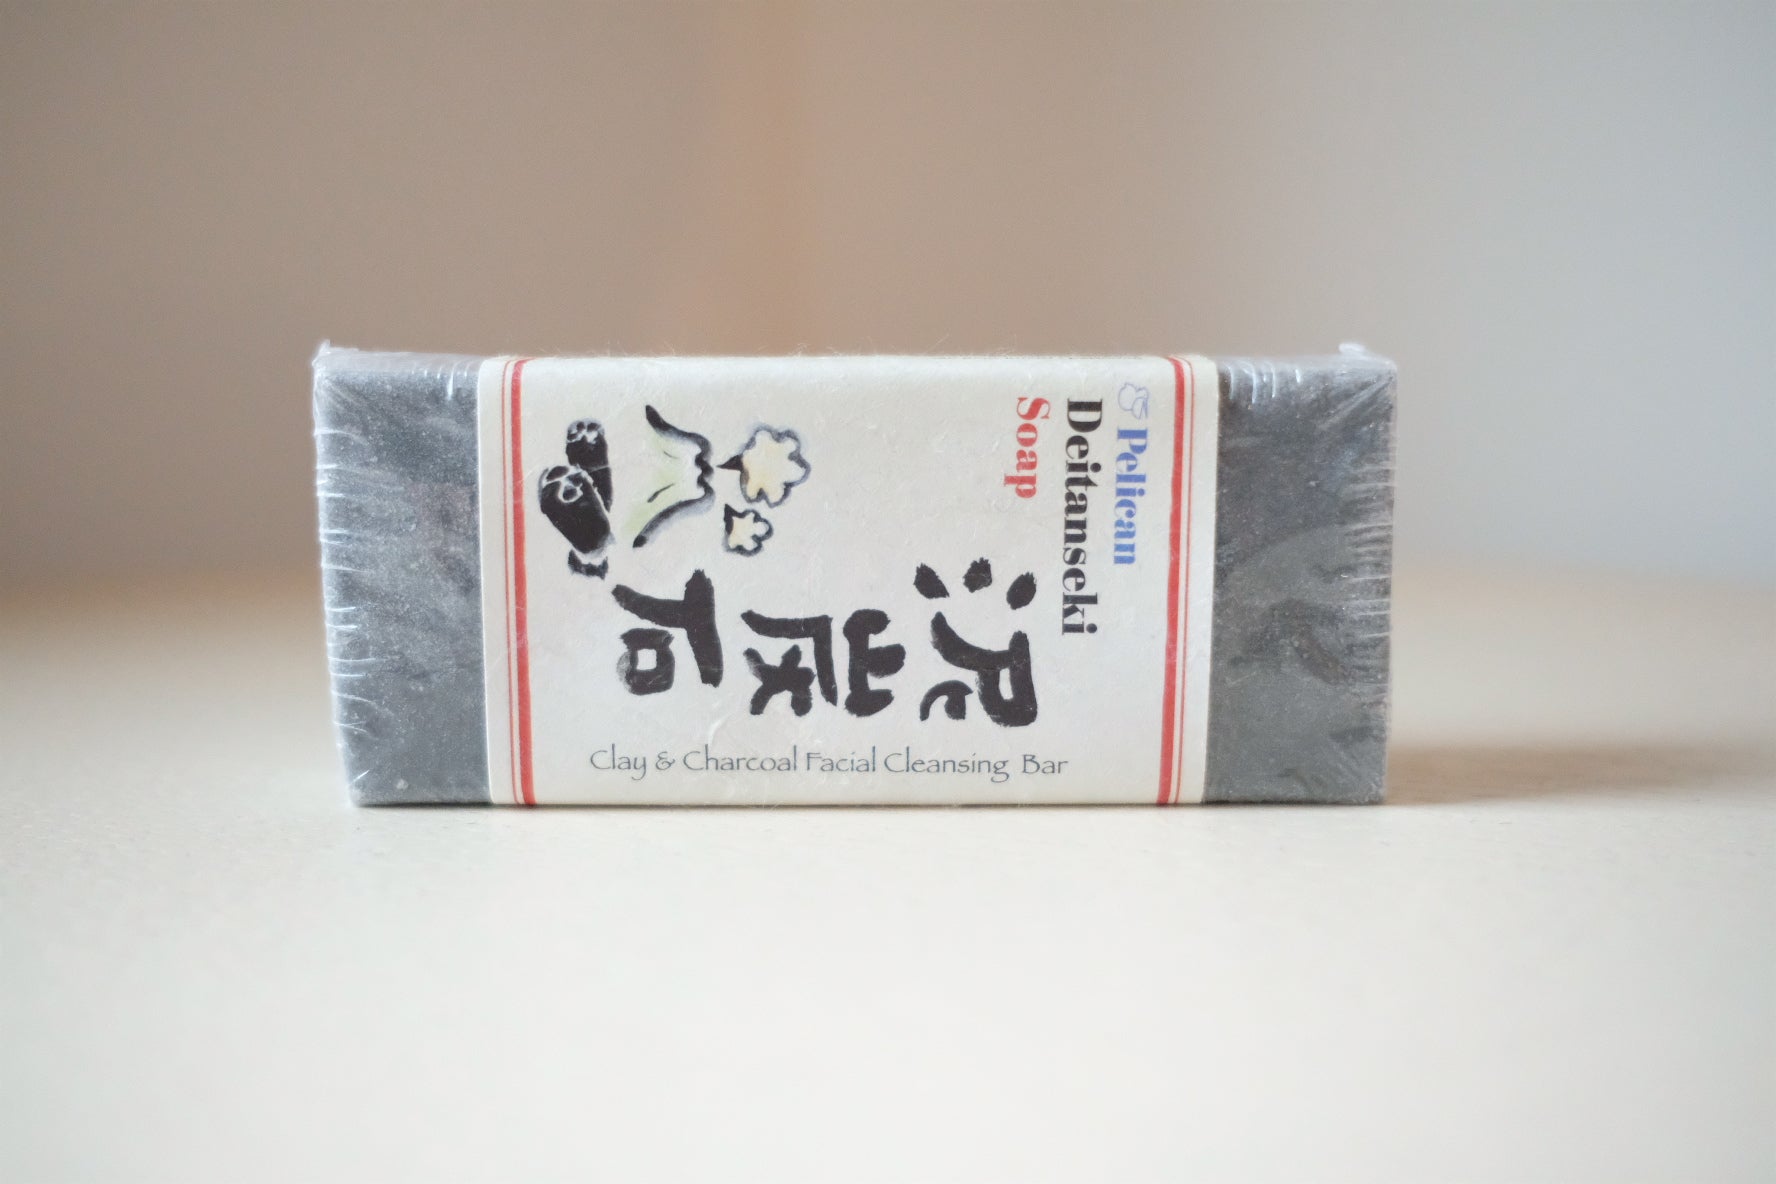 deitanseki soap - clay and charcoal cleansing bar